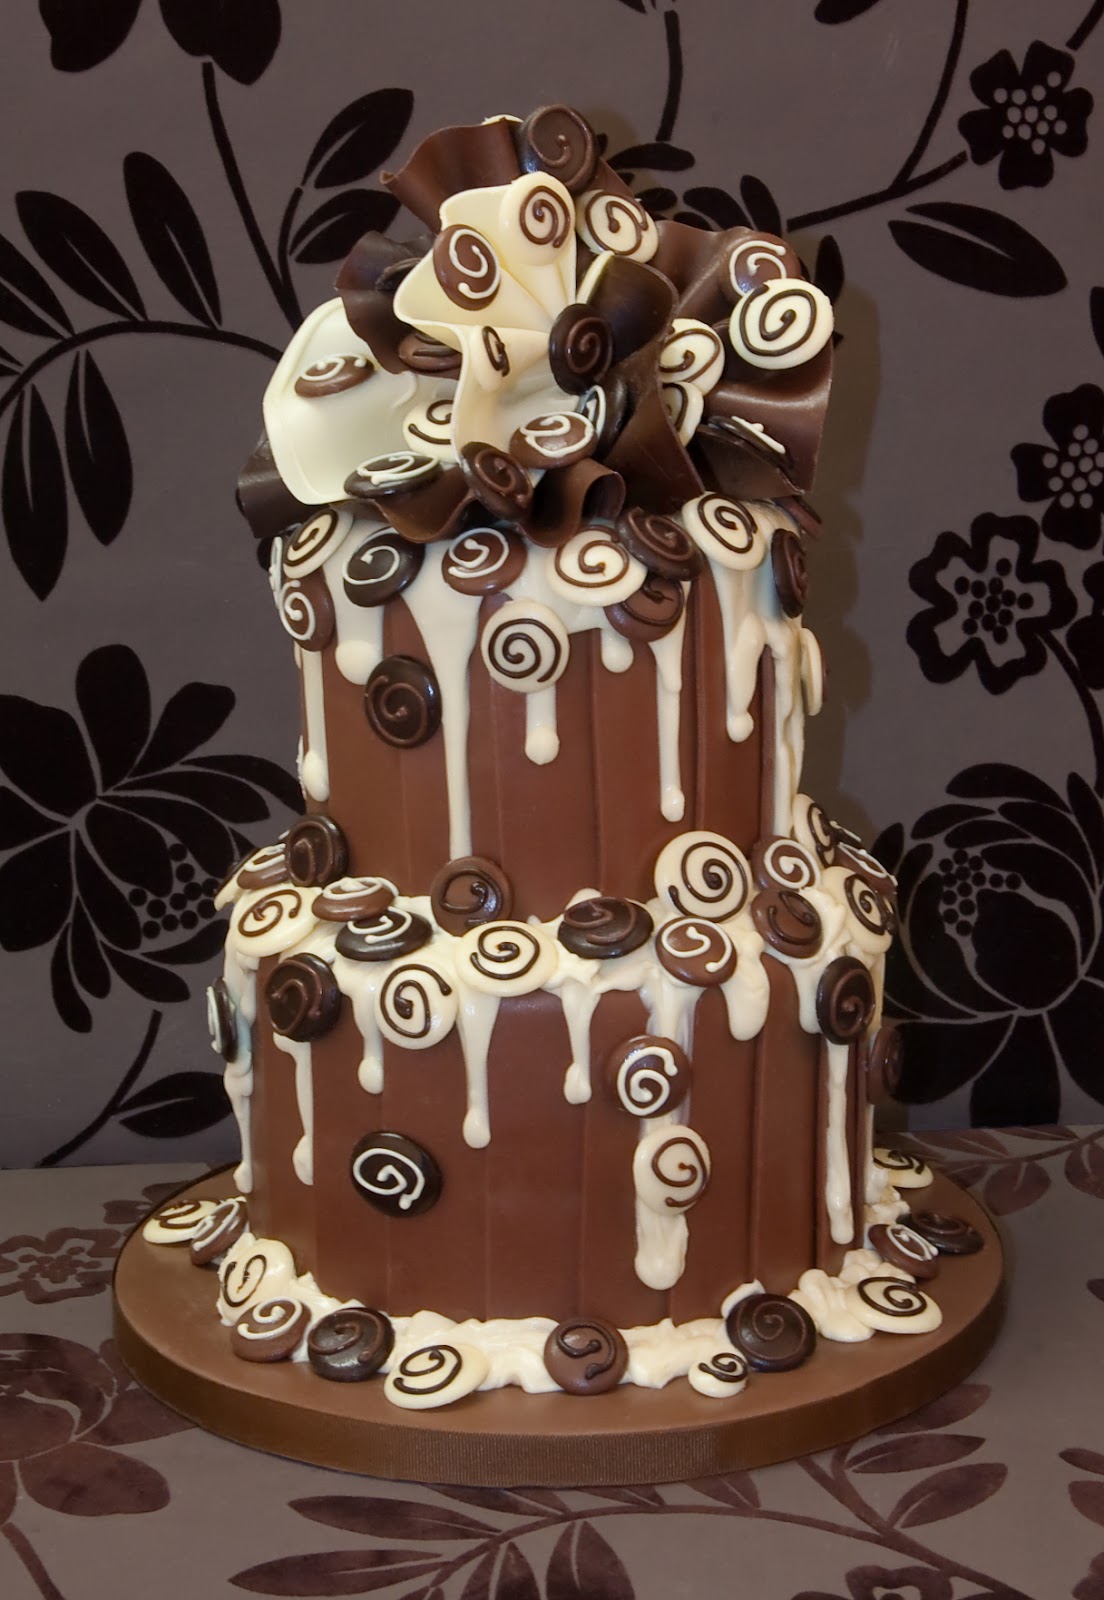 chocolate cake designs ideas Posted by Katie Watts at 02:52 No comments: